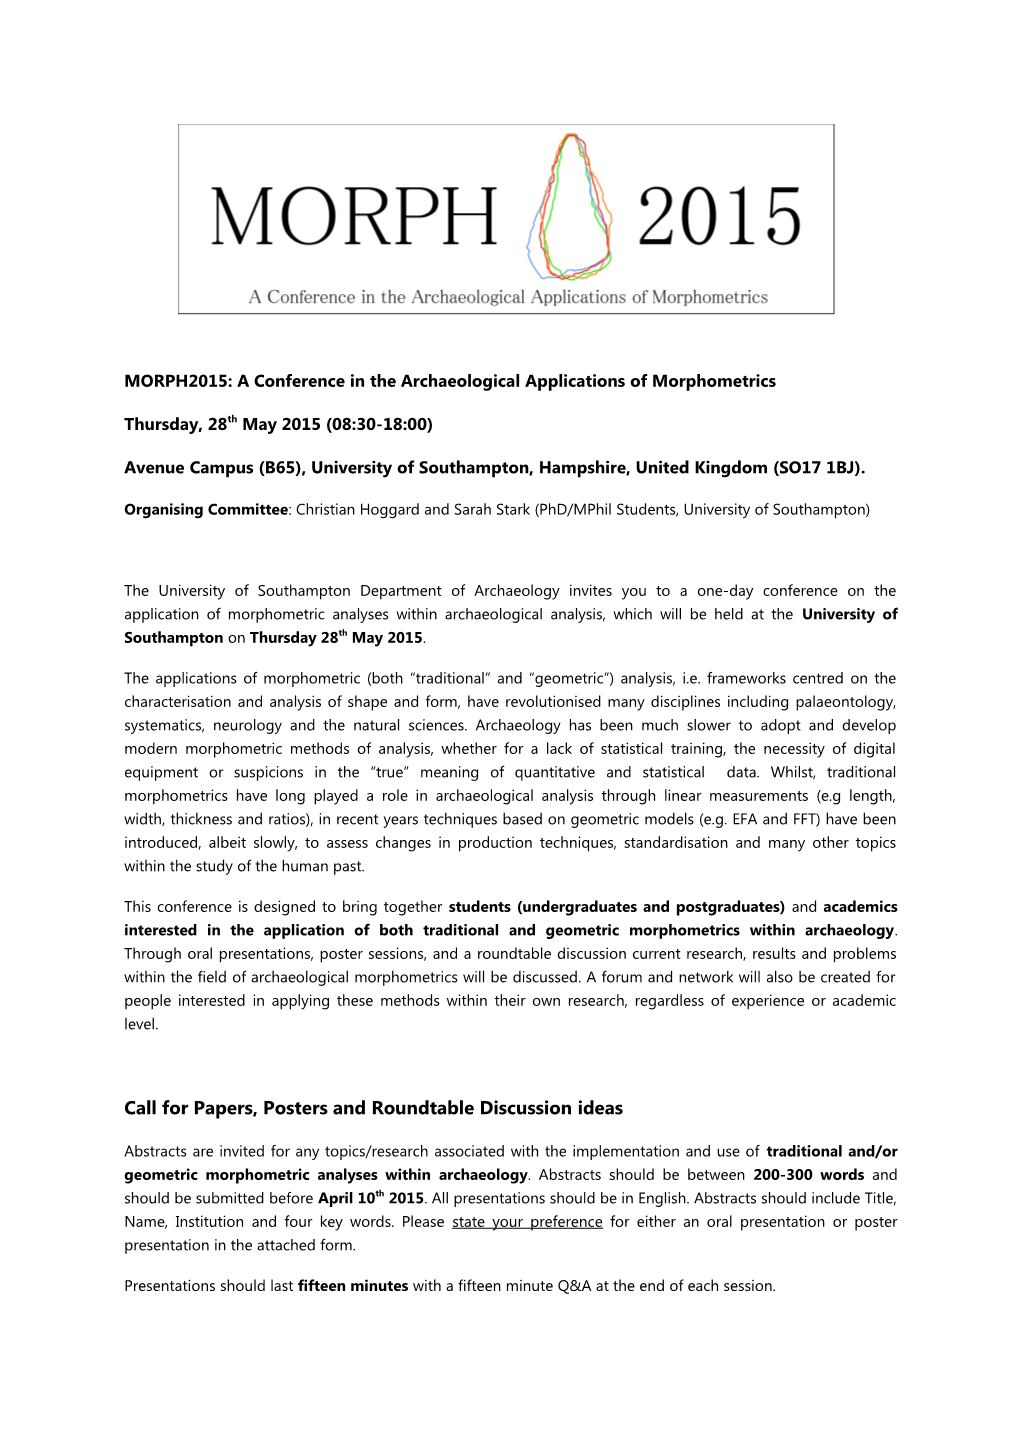 MORPH2015: a Conference in the Archaeological Applications of Morphometrics